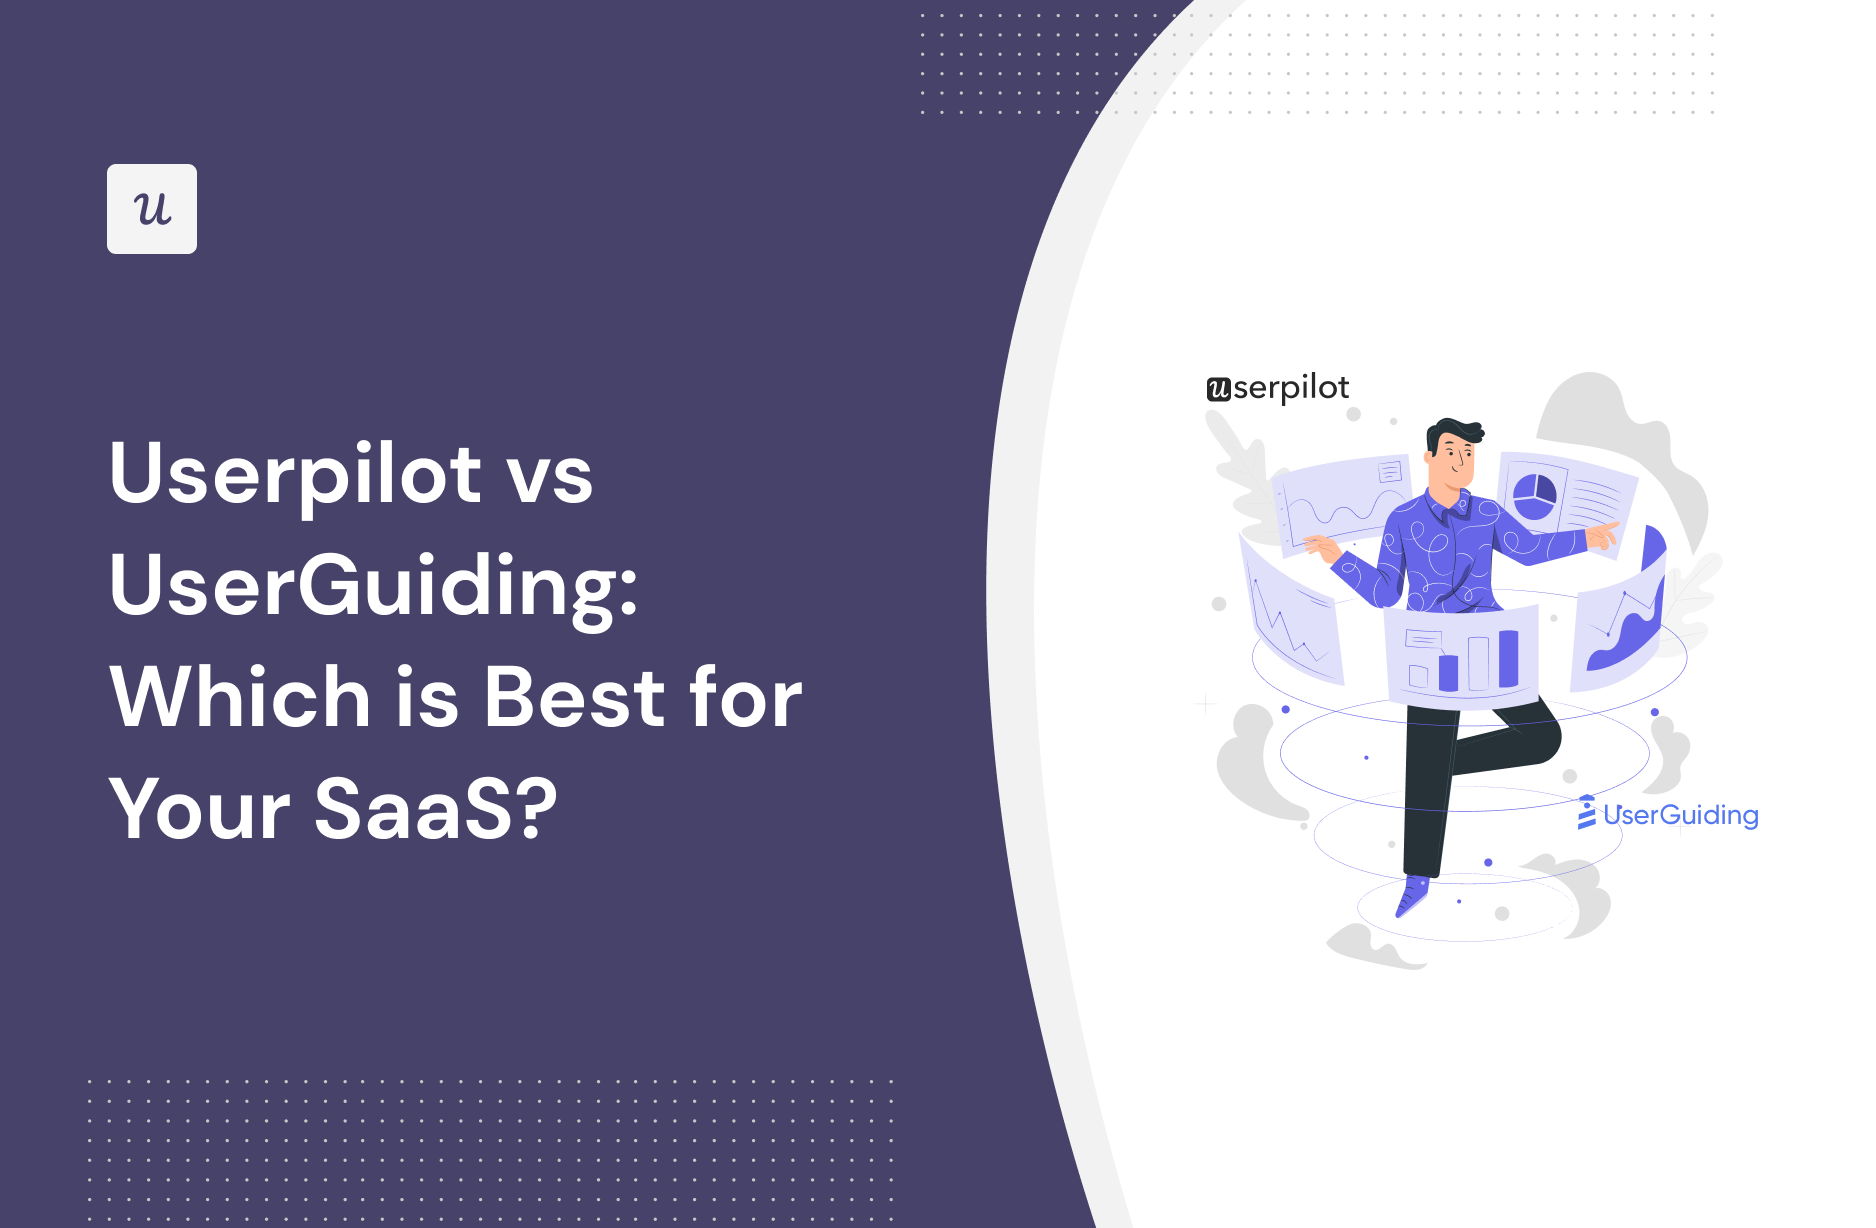 Userpilot vs UserGuiding: Which is Best for Your SaaS?